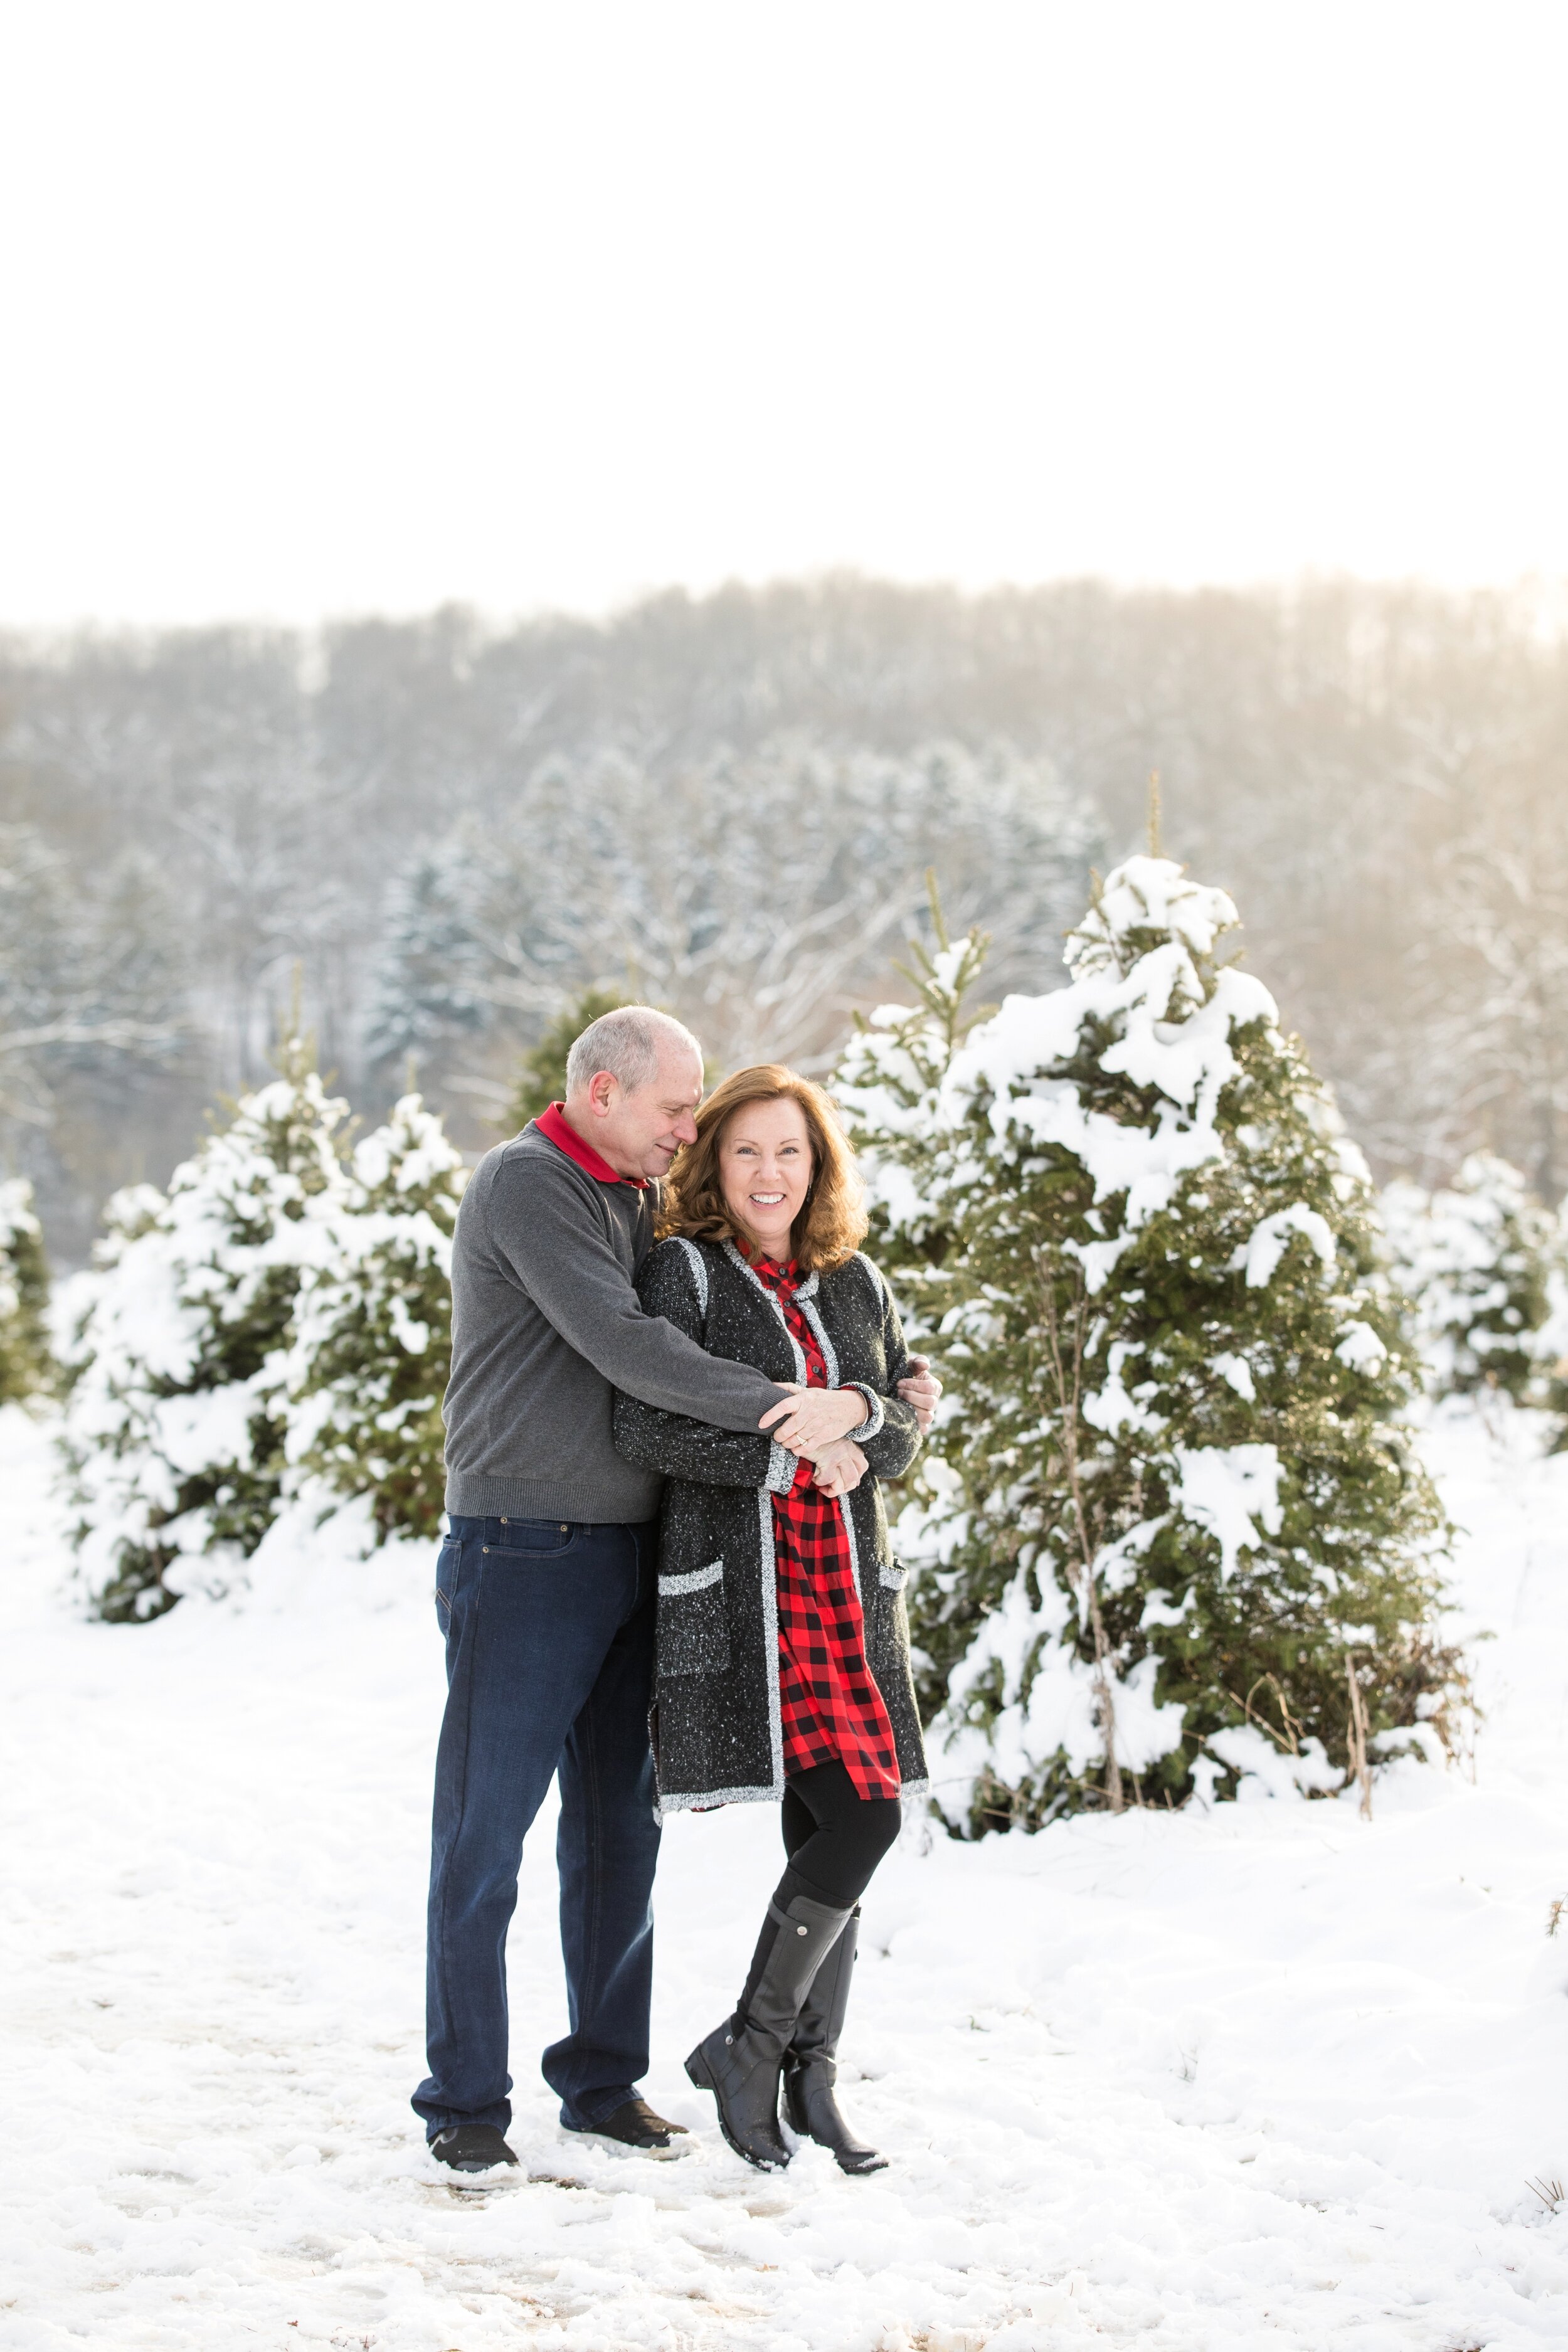 location ideas for photo sessions near cranberry township and zelienople, cranberry township photographer, zelienople photographer, north pittsburgh photographer, lake forest gardens pictures